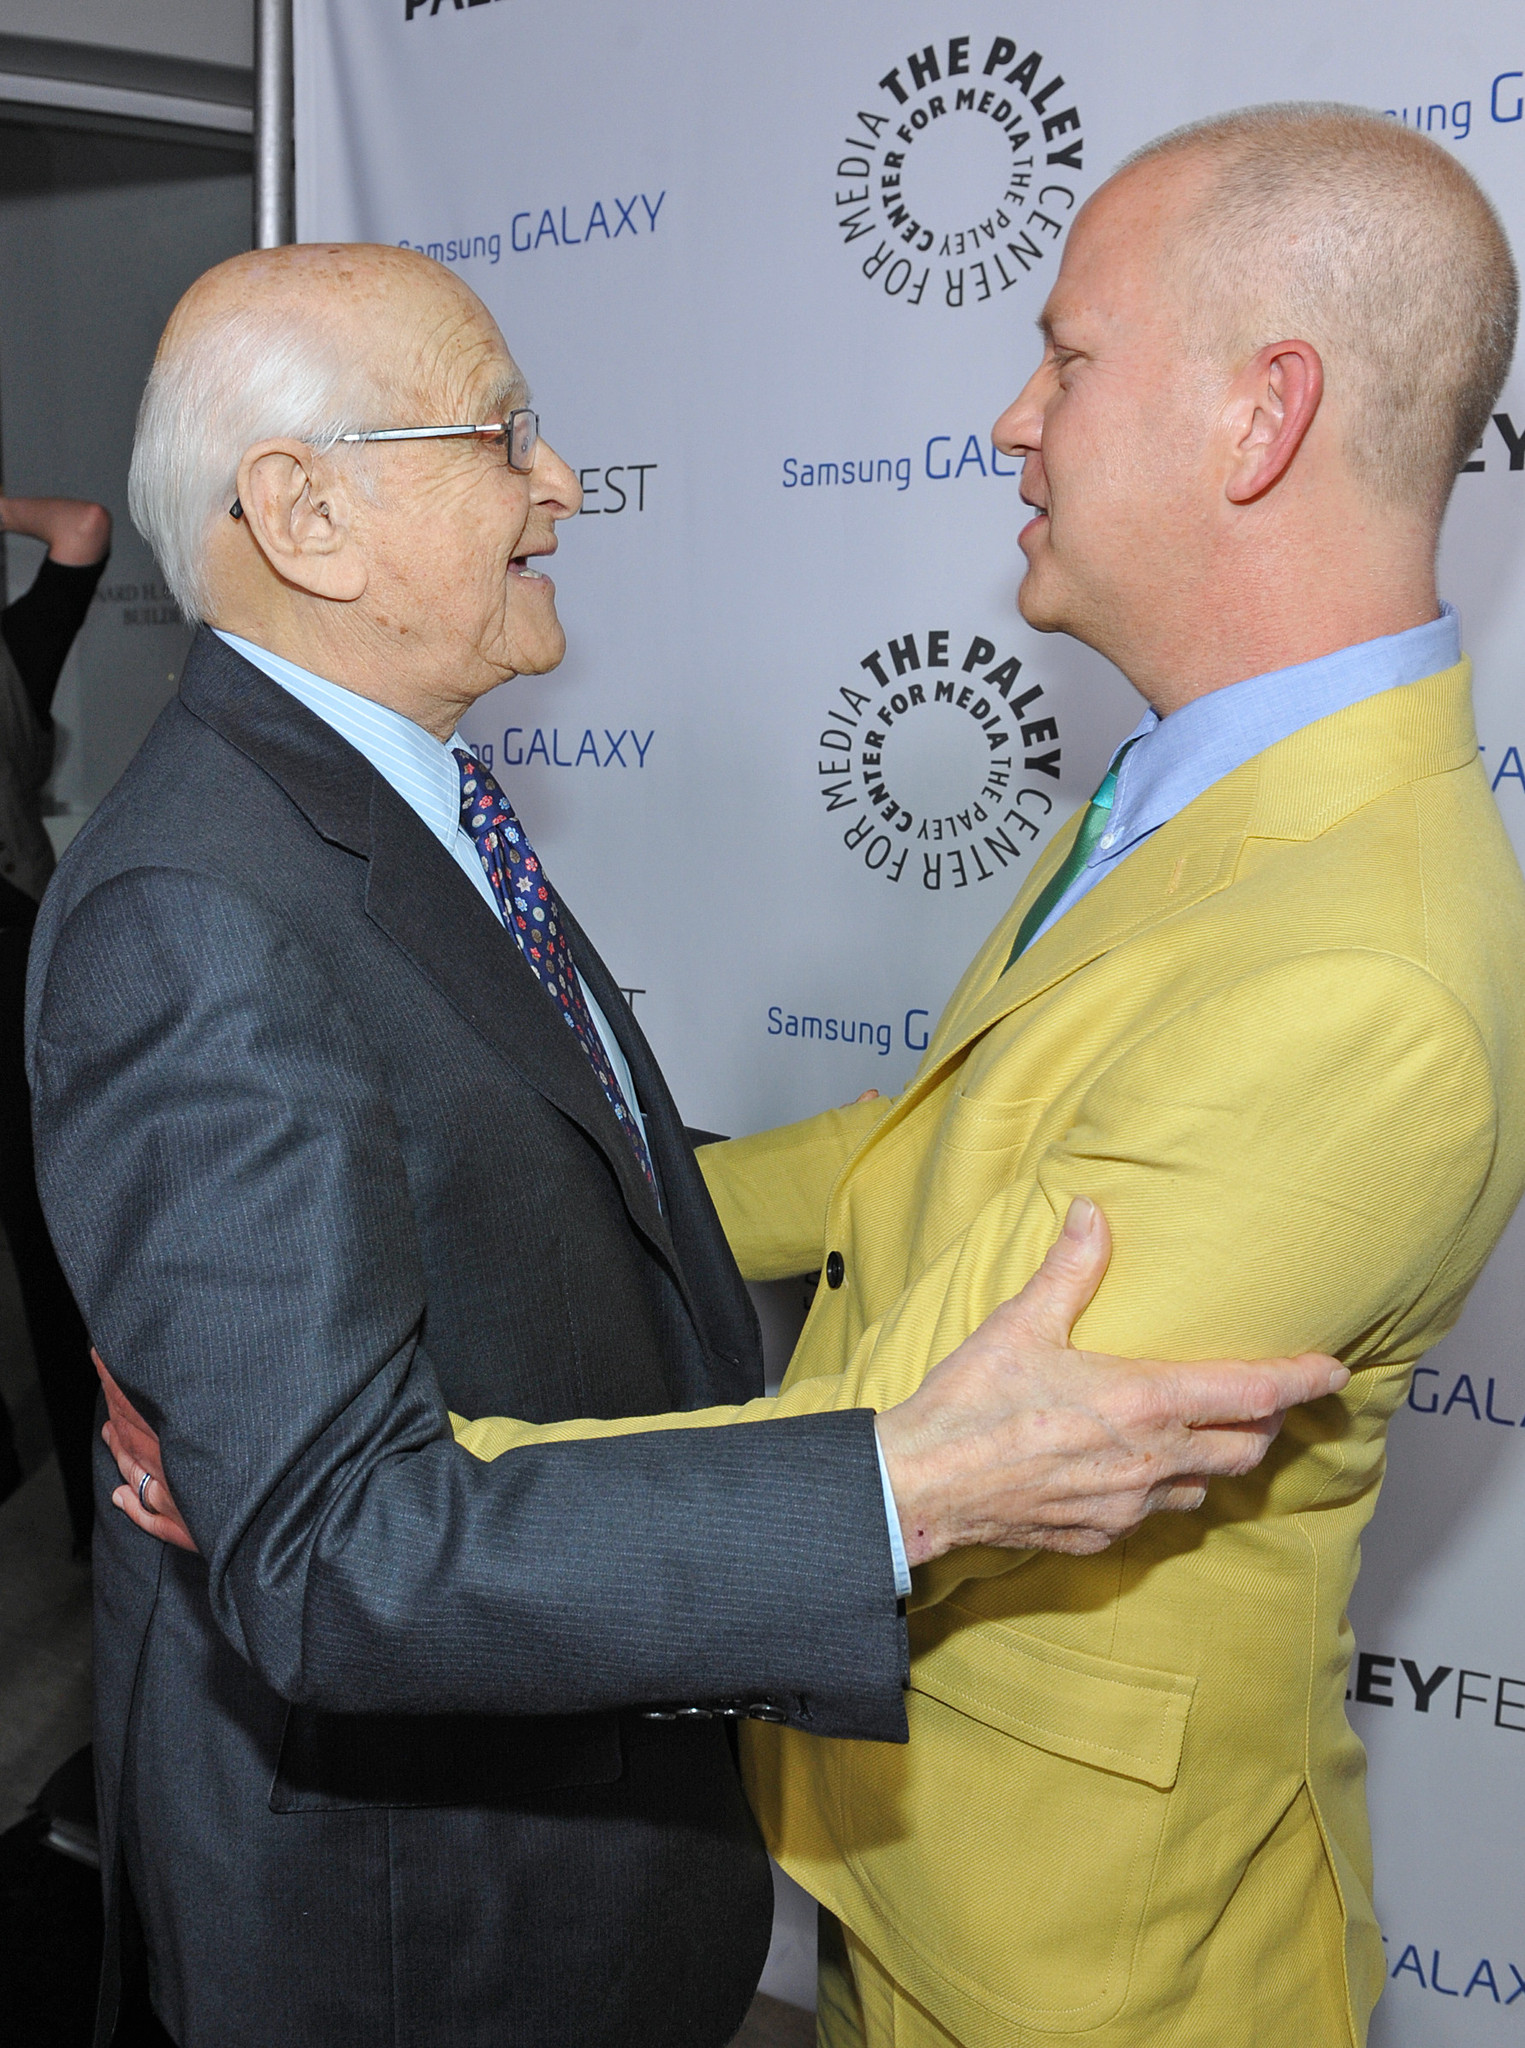 Norman Lear and Ryan Murphy